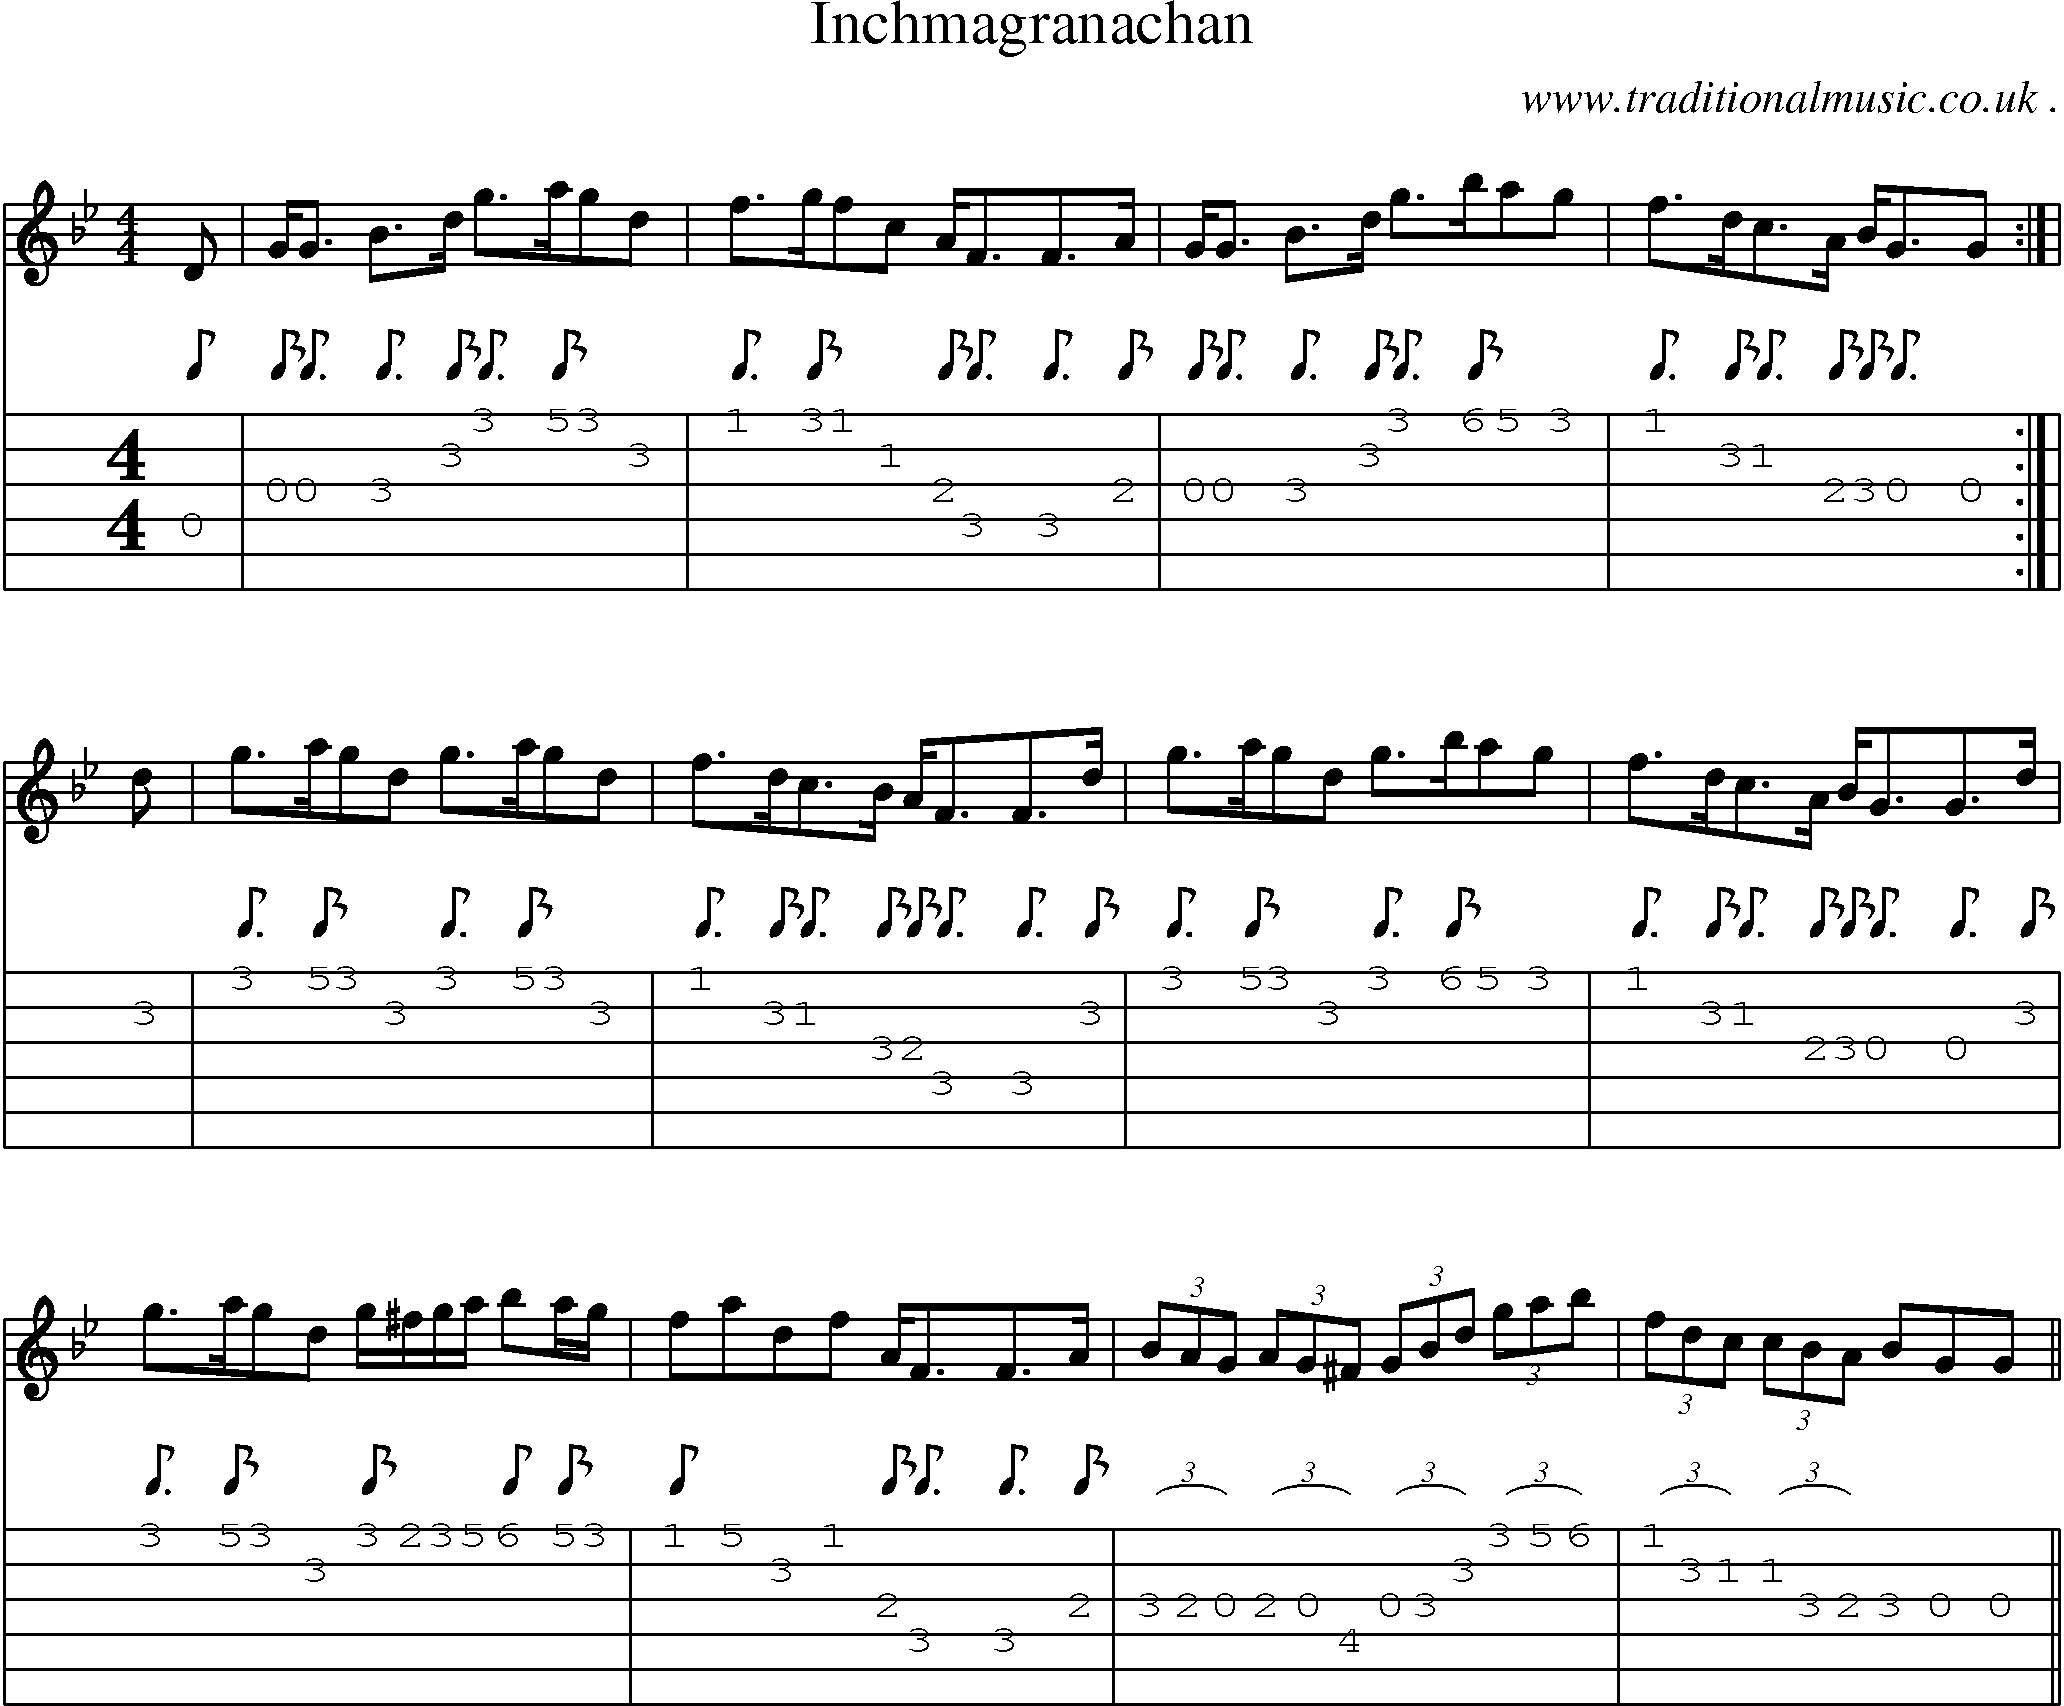 Sheet-Music and Guitar Tabs for Inchmagranachan